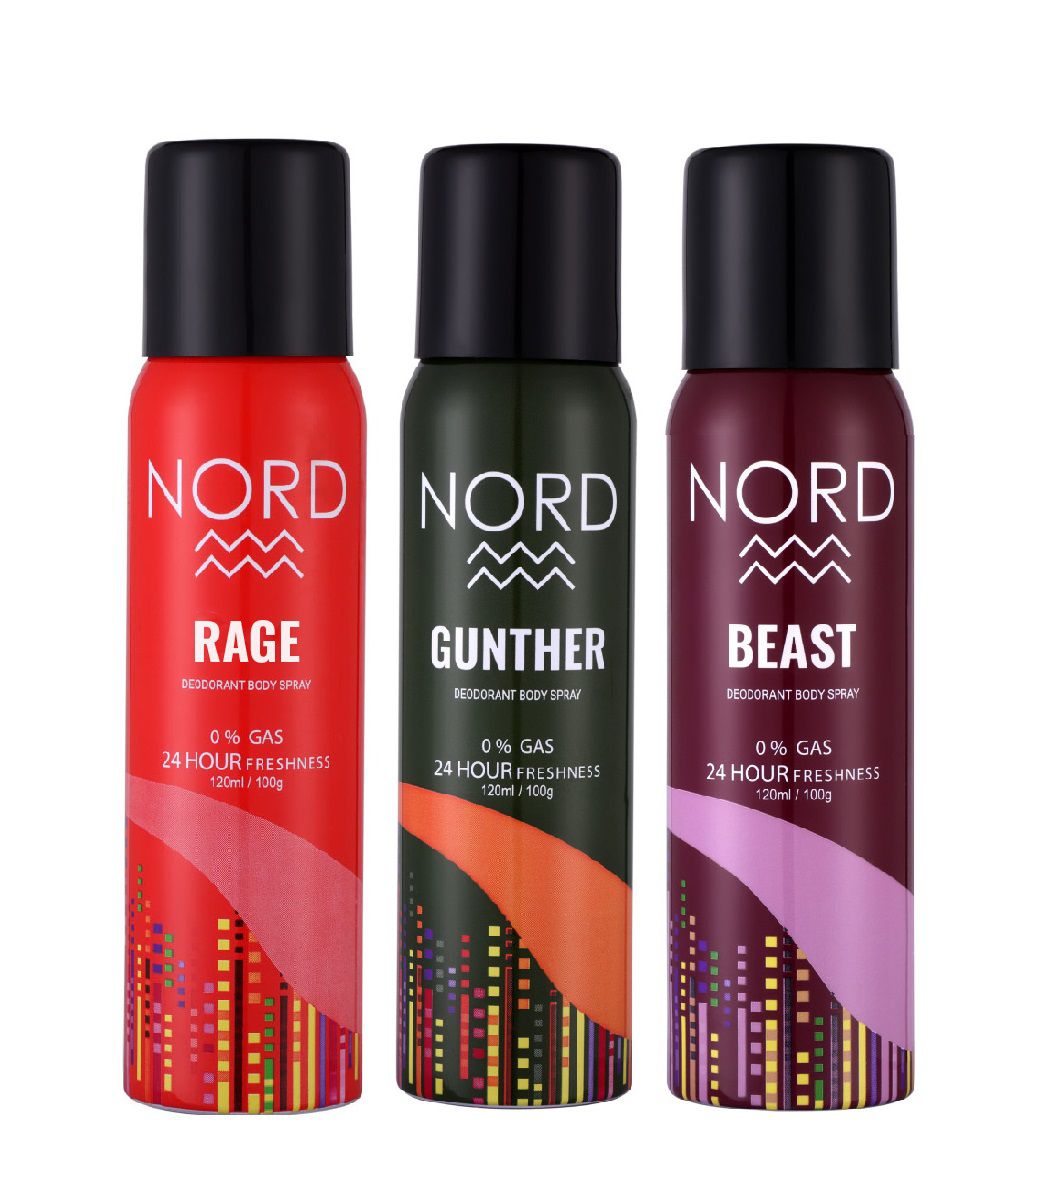     			NORD Deodorant Body Spray - Rage, Gunther and Beast 120 ml each (Pack of 3)